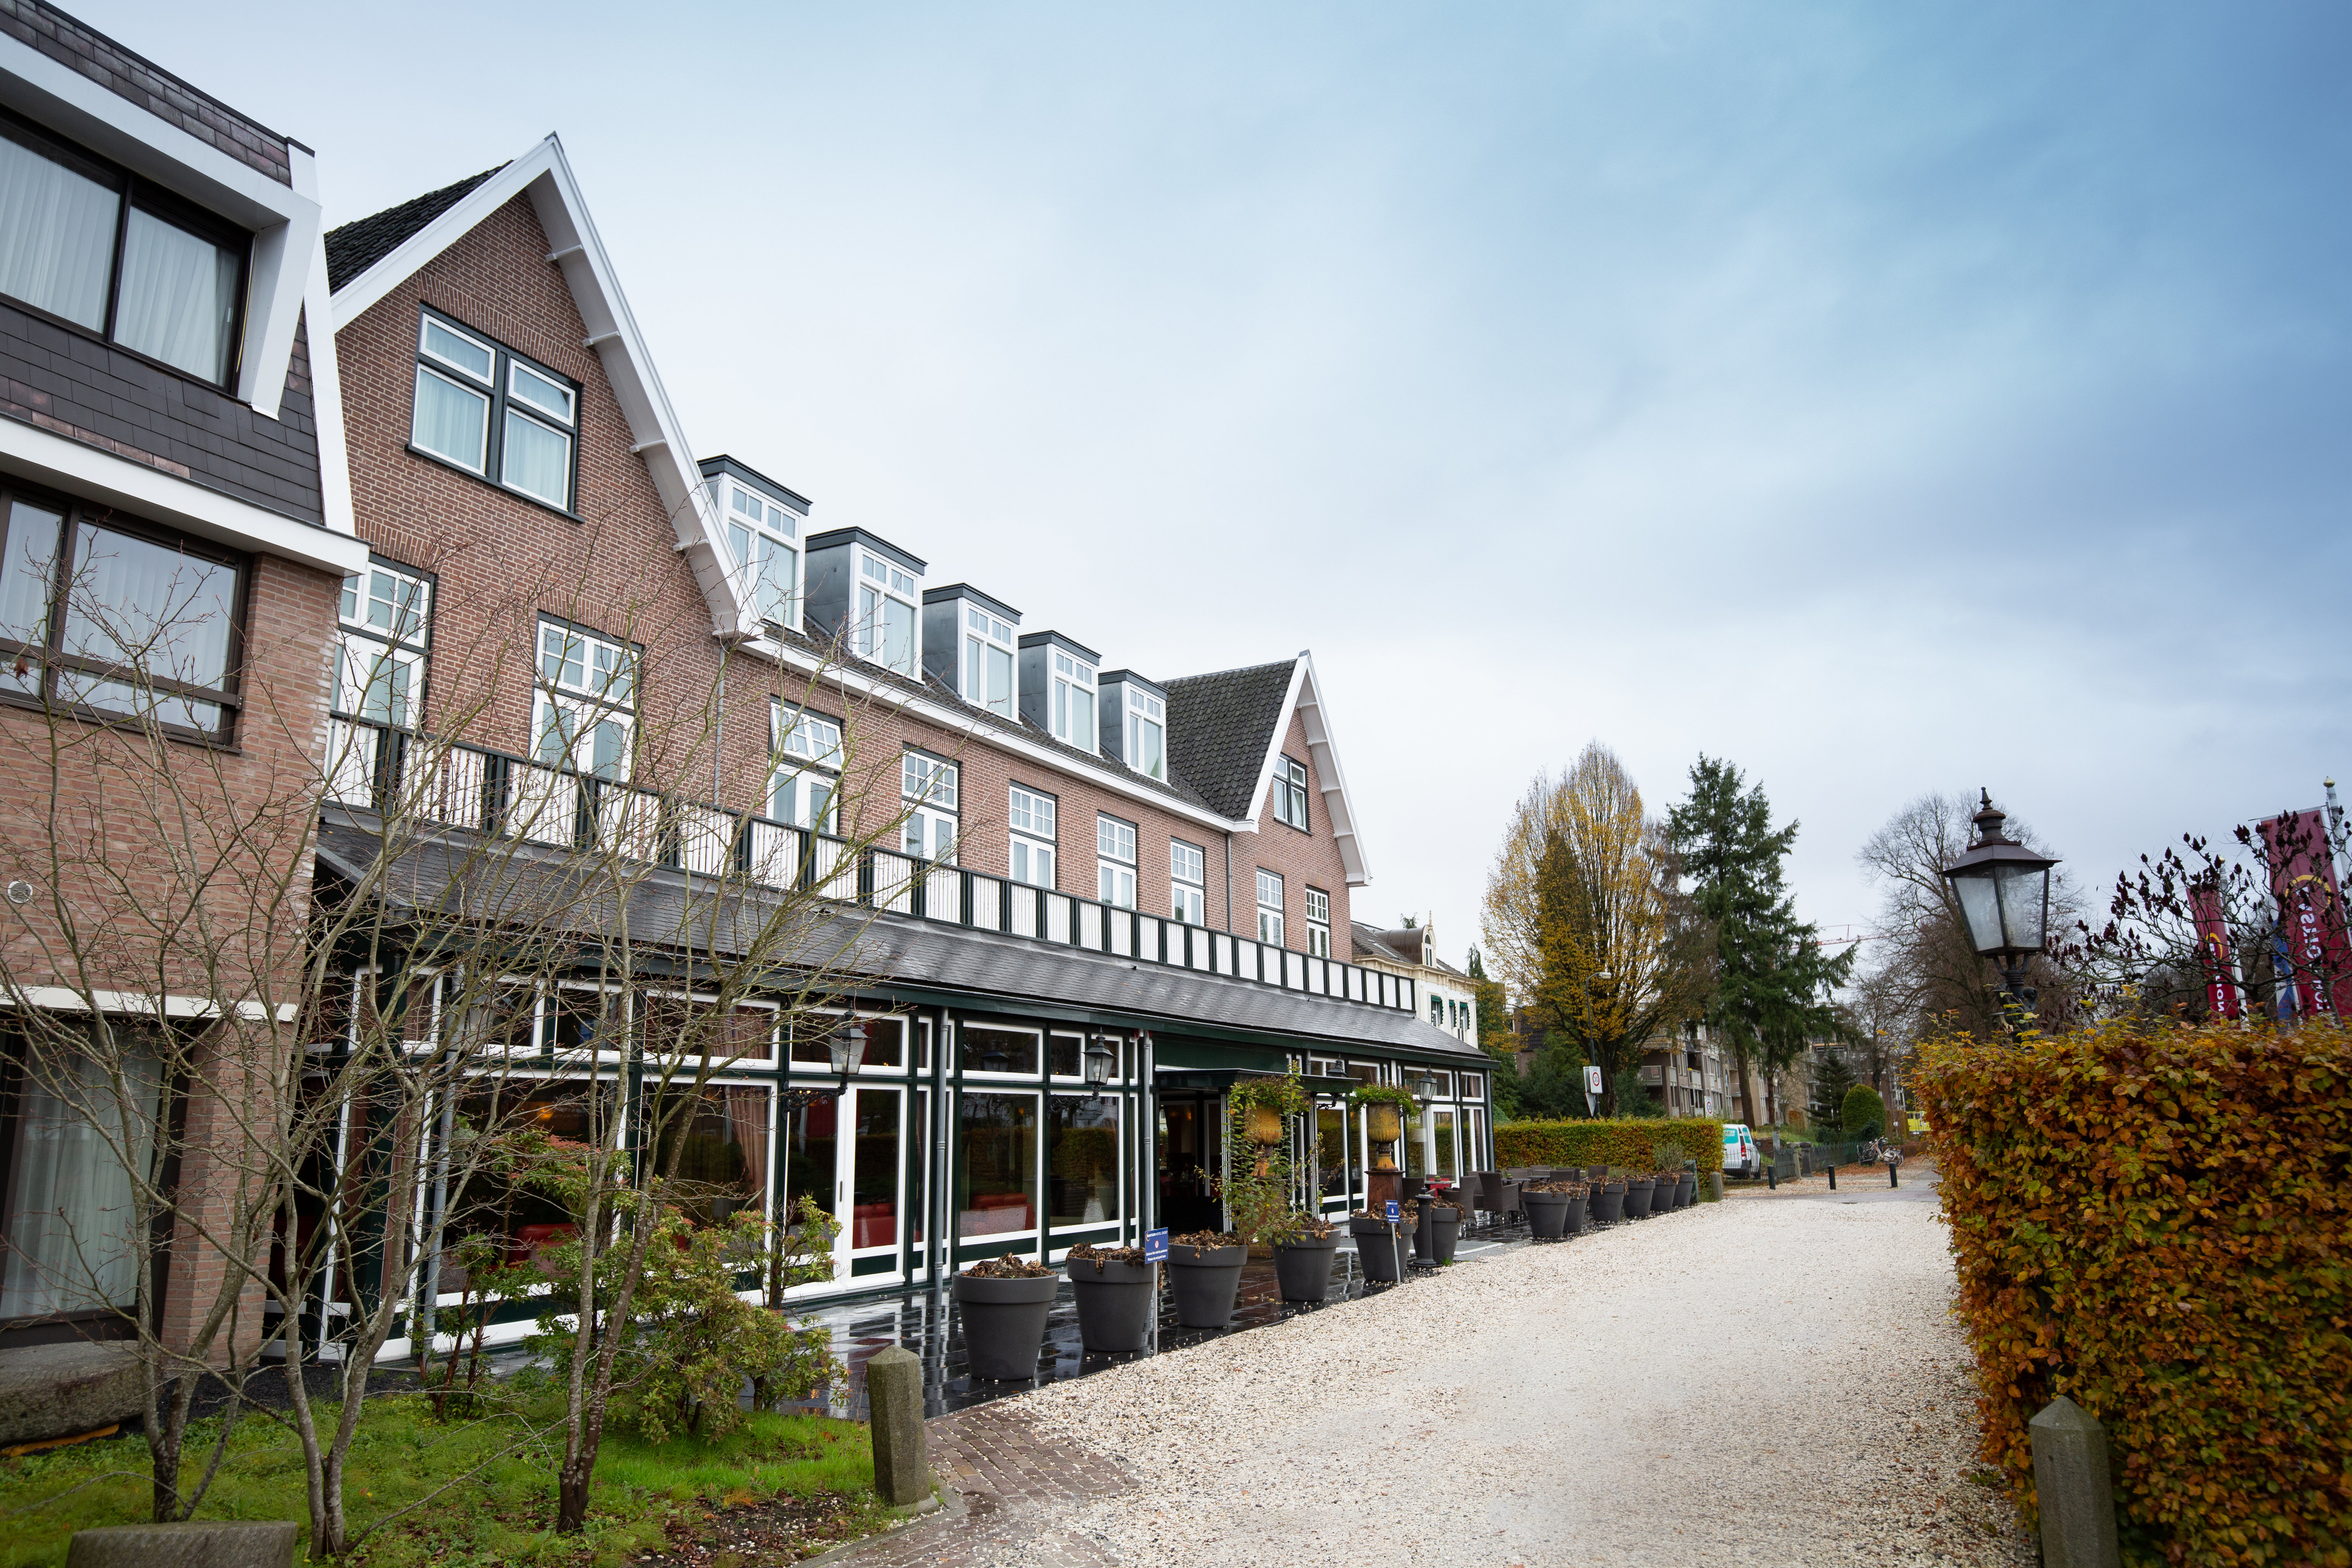 Bastion Hotel Apeldoorn Het Loo <br/>69.00 ew <br/> <a href='http://vakantieoplossing.nl/outpage/?id=681a5838f9226e7664bb854ce42a8d1c' target='_blank'>View Details</a>